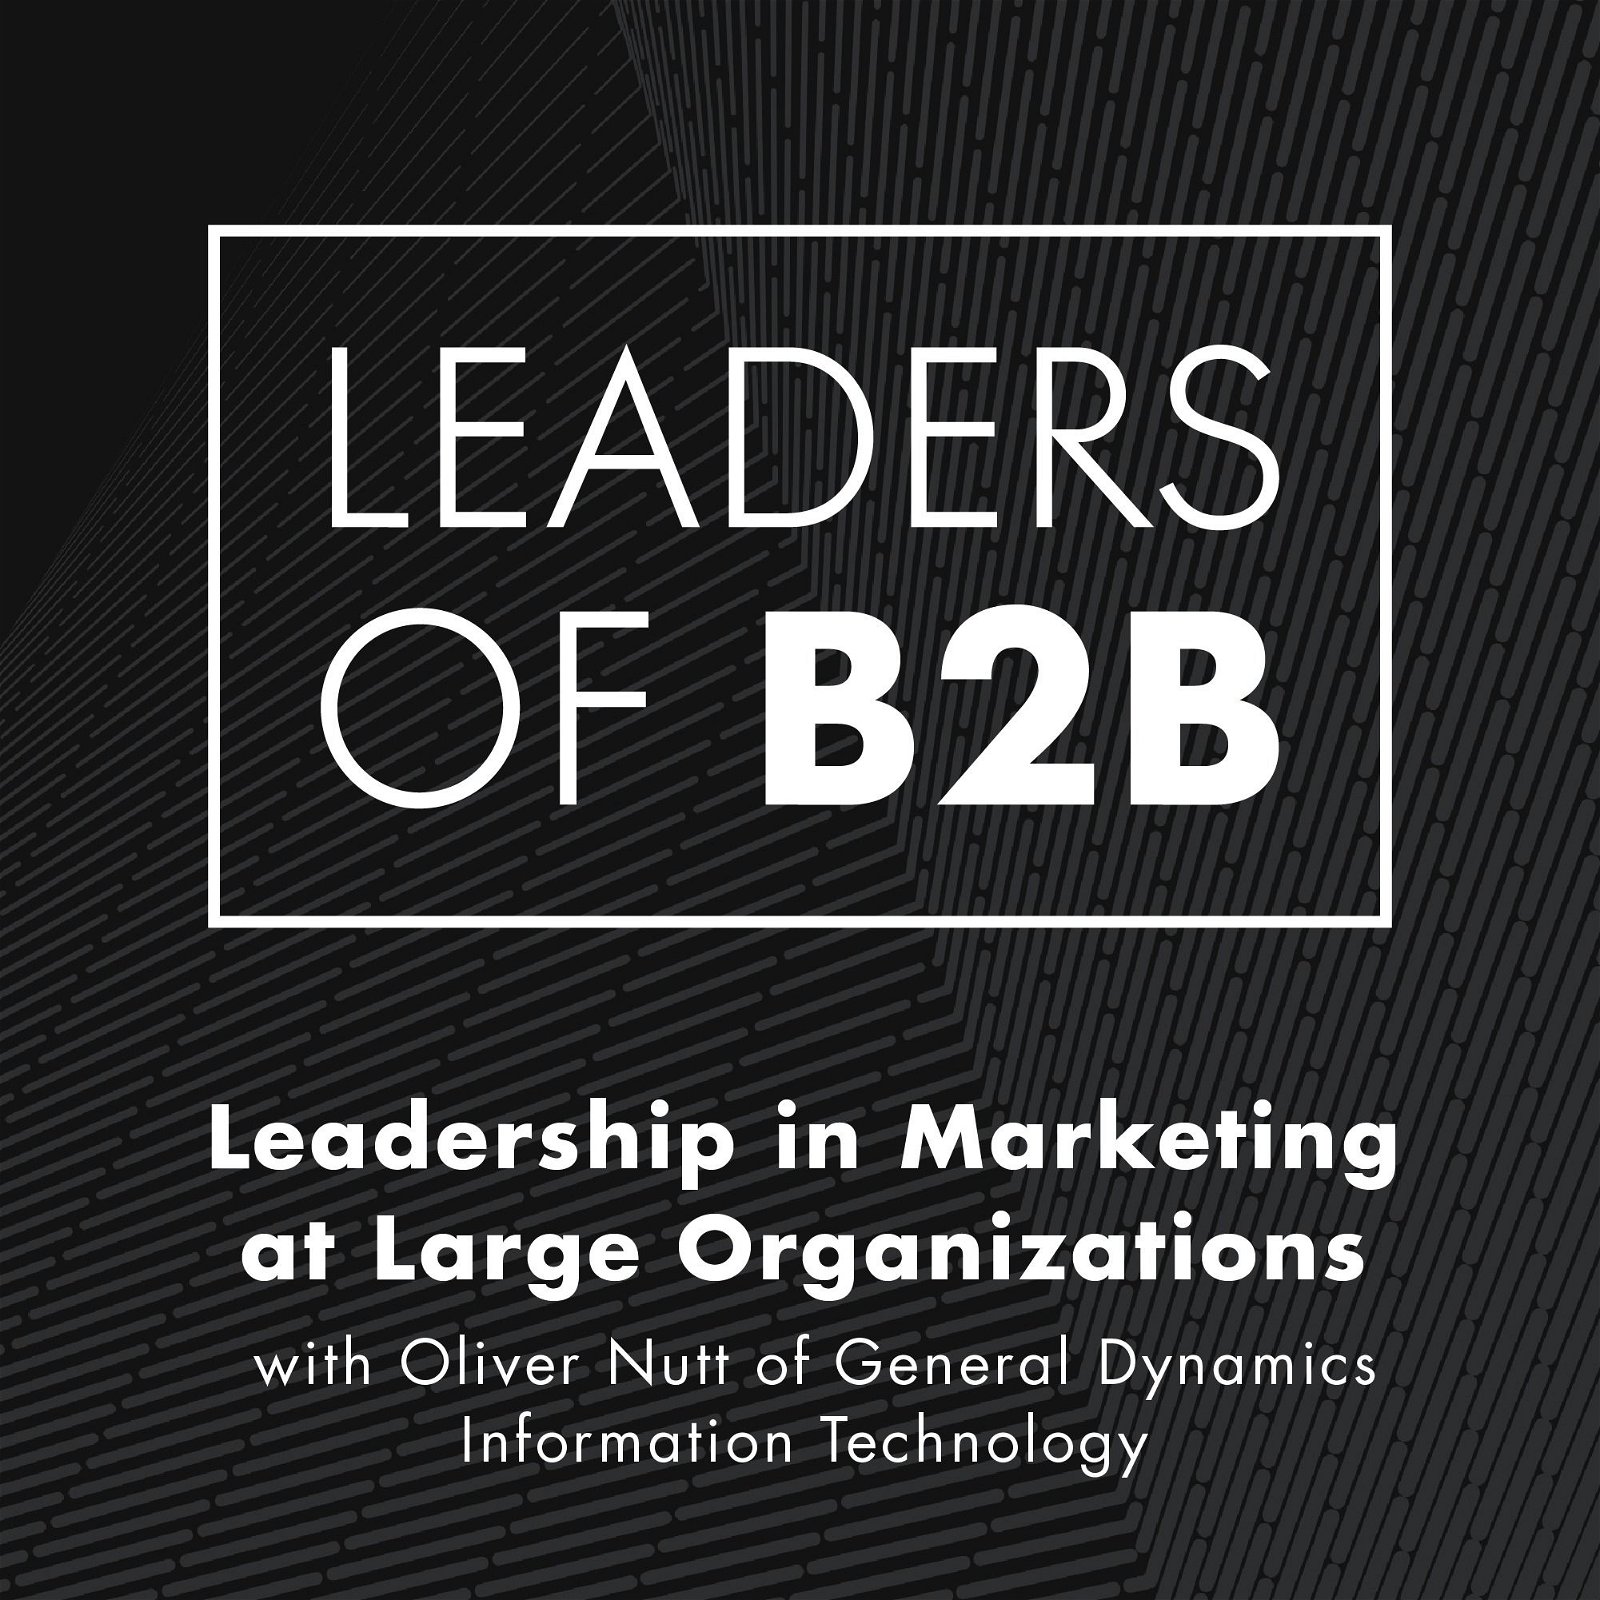 Leadership in Marketing at Large Organizations with Oliver Nutt of General Dynamics Information Technology